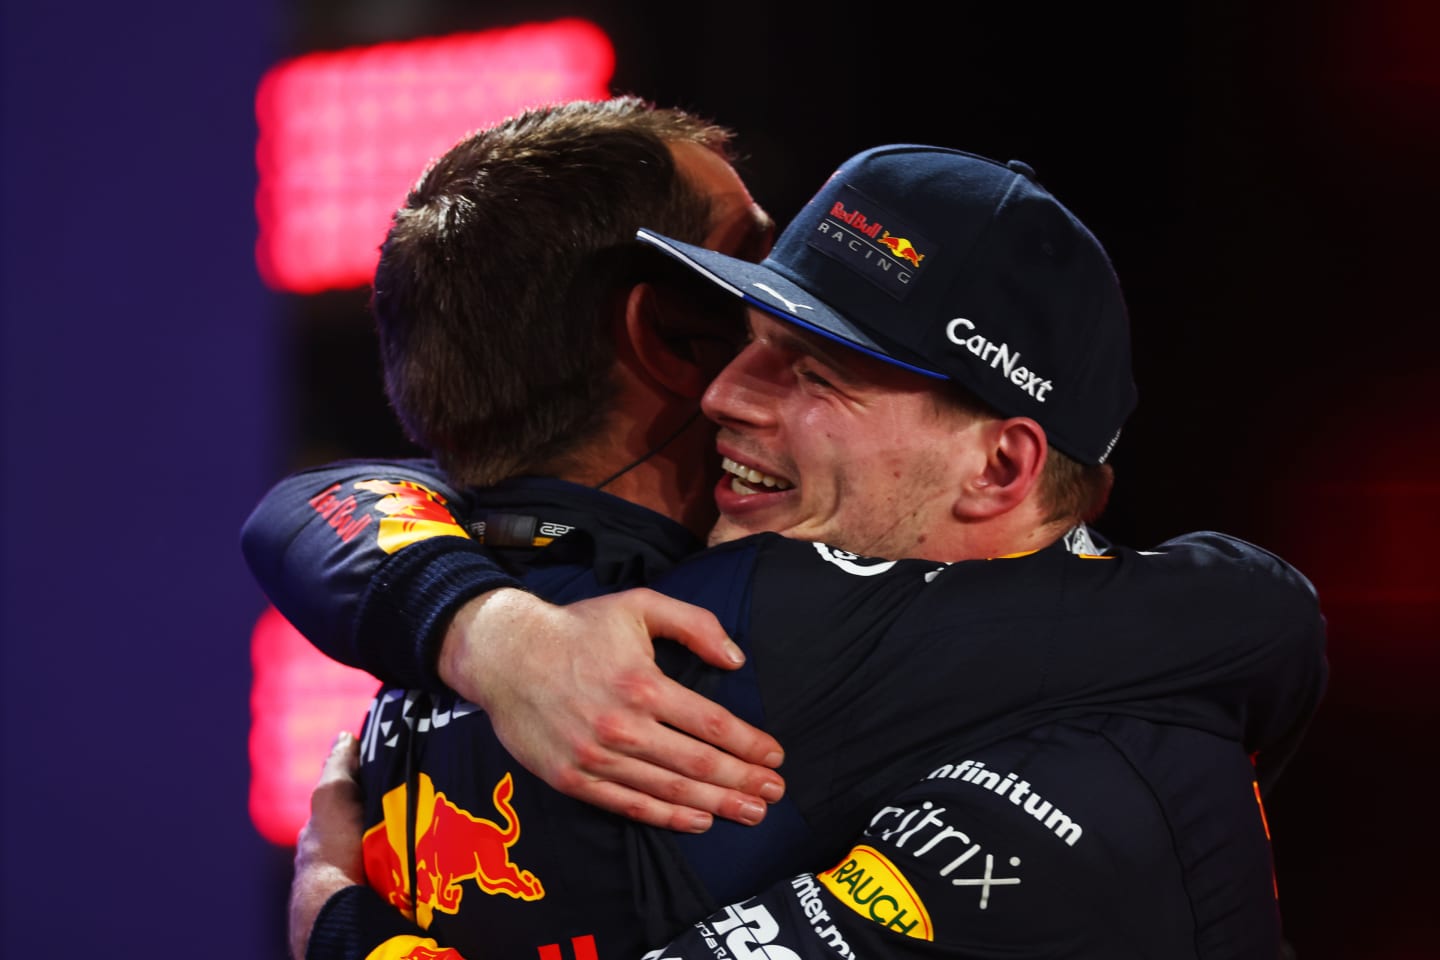 JEDDAH, SAUDI ARABIA - MARCH 27: Race winner Max Verstappen of the Netherlands and Oracle Red Bull Racing celebrates in parc ferme during the F1 Grand Prix of Saudi Arabia at the Jeddah Corniche Circuit on March 27, 2022 in Jeddah, Saudi Arabia. (Photo by Lars Baron/Getty Images)